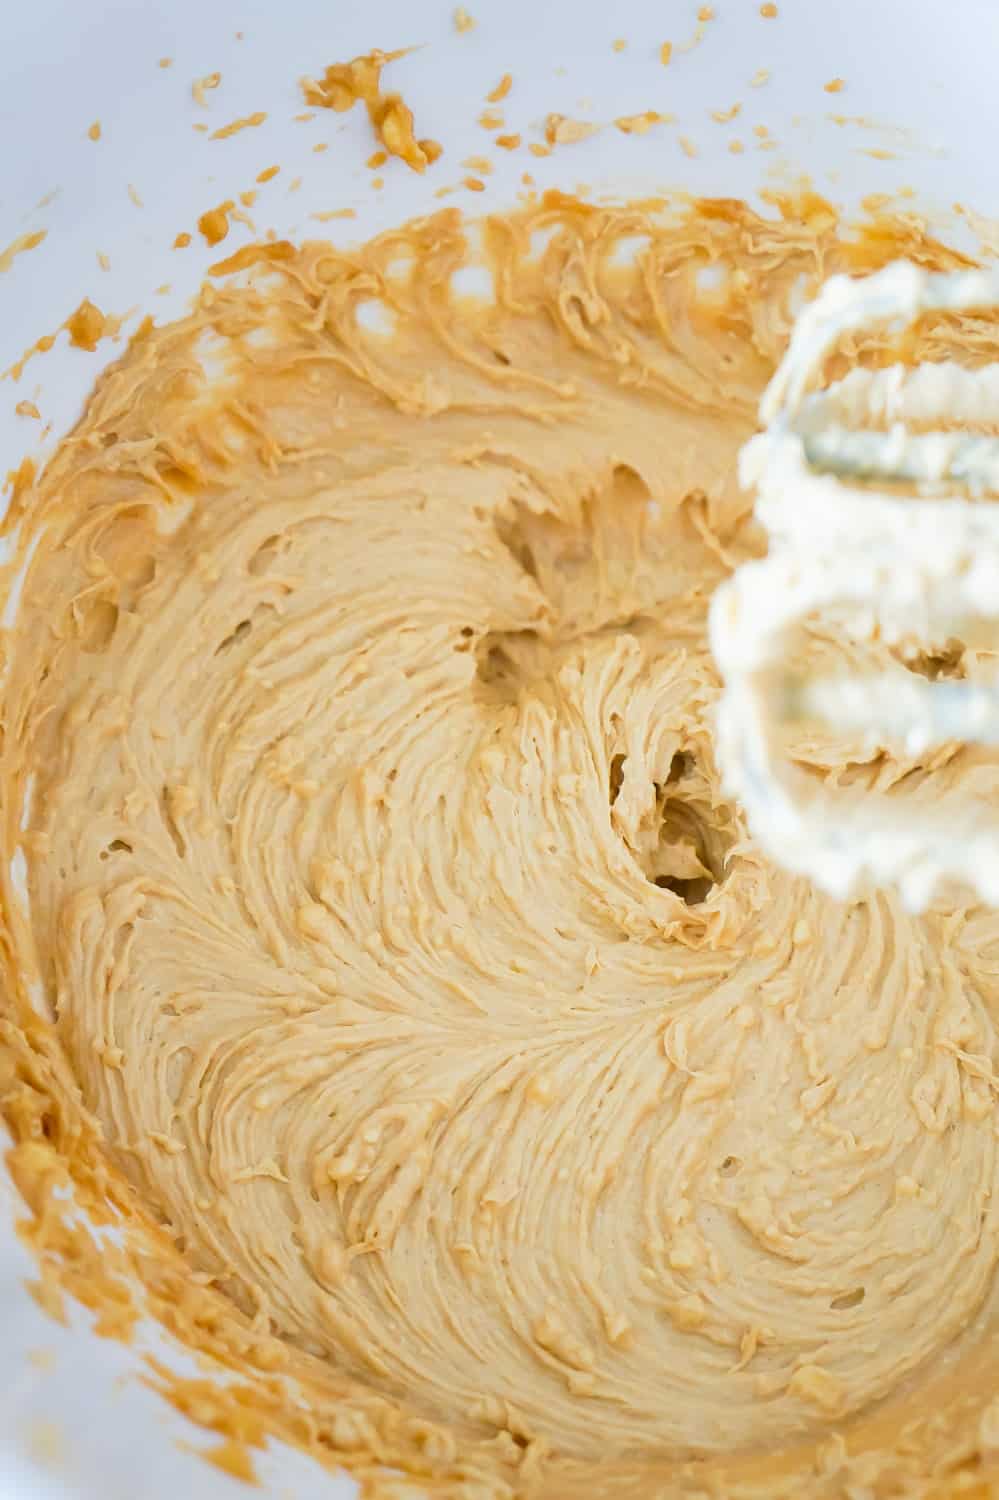 creamy peanut butter mixture in a mixing bowl